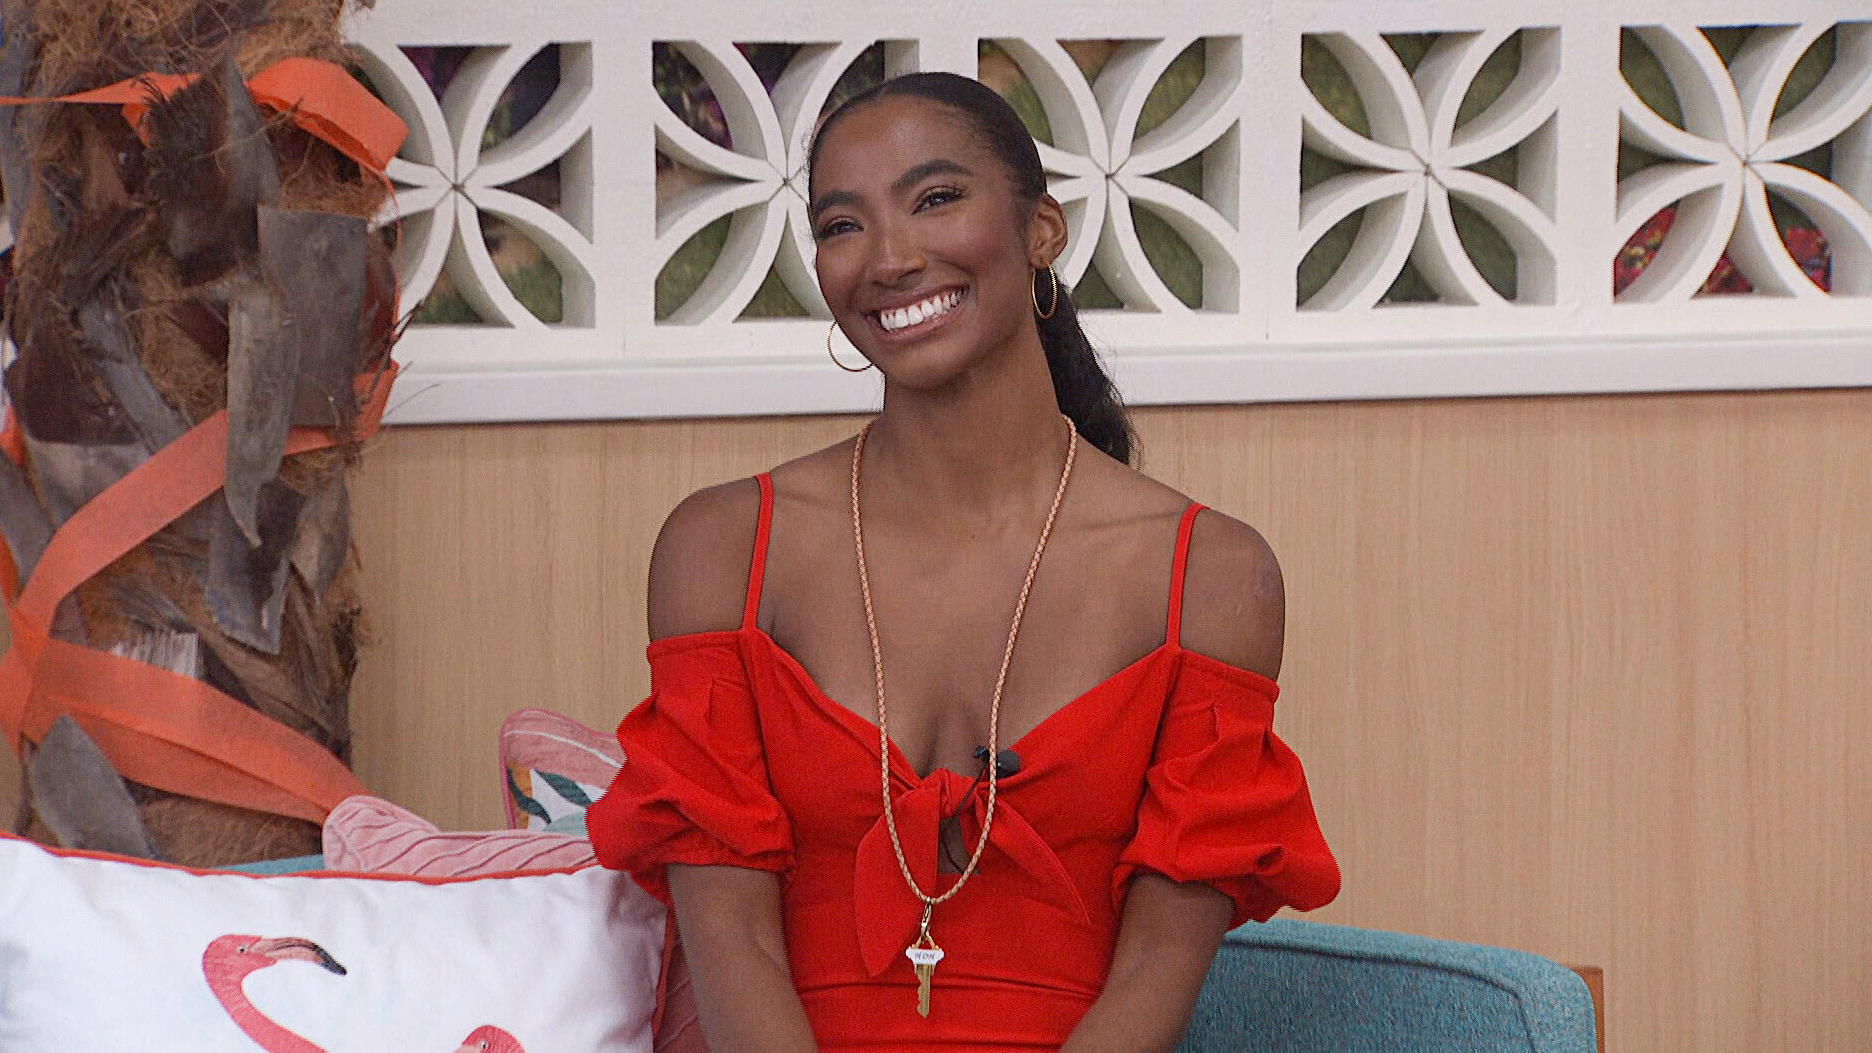 https://www.usmagazine.com/wp-content/uploads/2022/09/Taylor-Hale-Named-Americas-Favorite-Player-During-Big-Brother-Season-24-Finale-After-Poor-Cast-Treatment-01.jpg?quality=86&strip=all